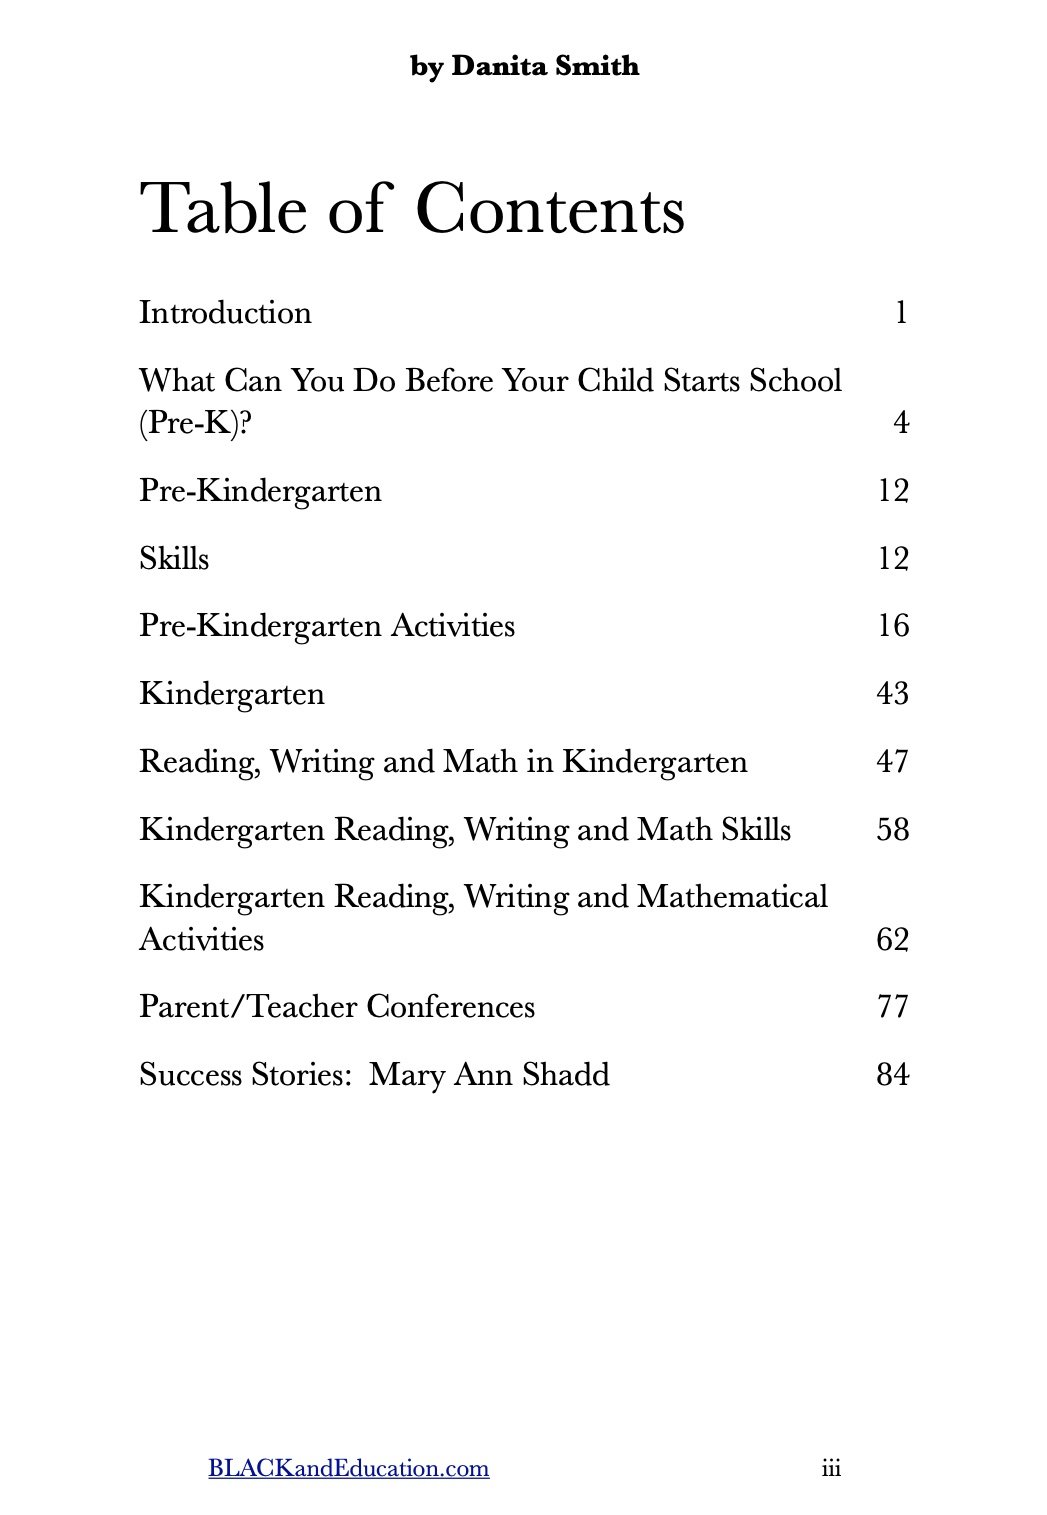 Prek and K Table of contents.jpg